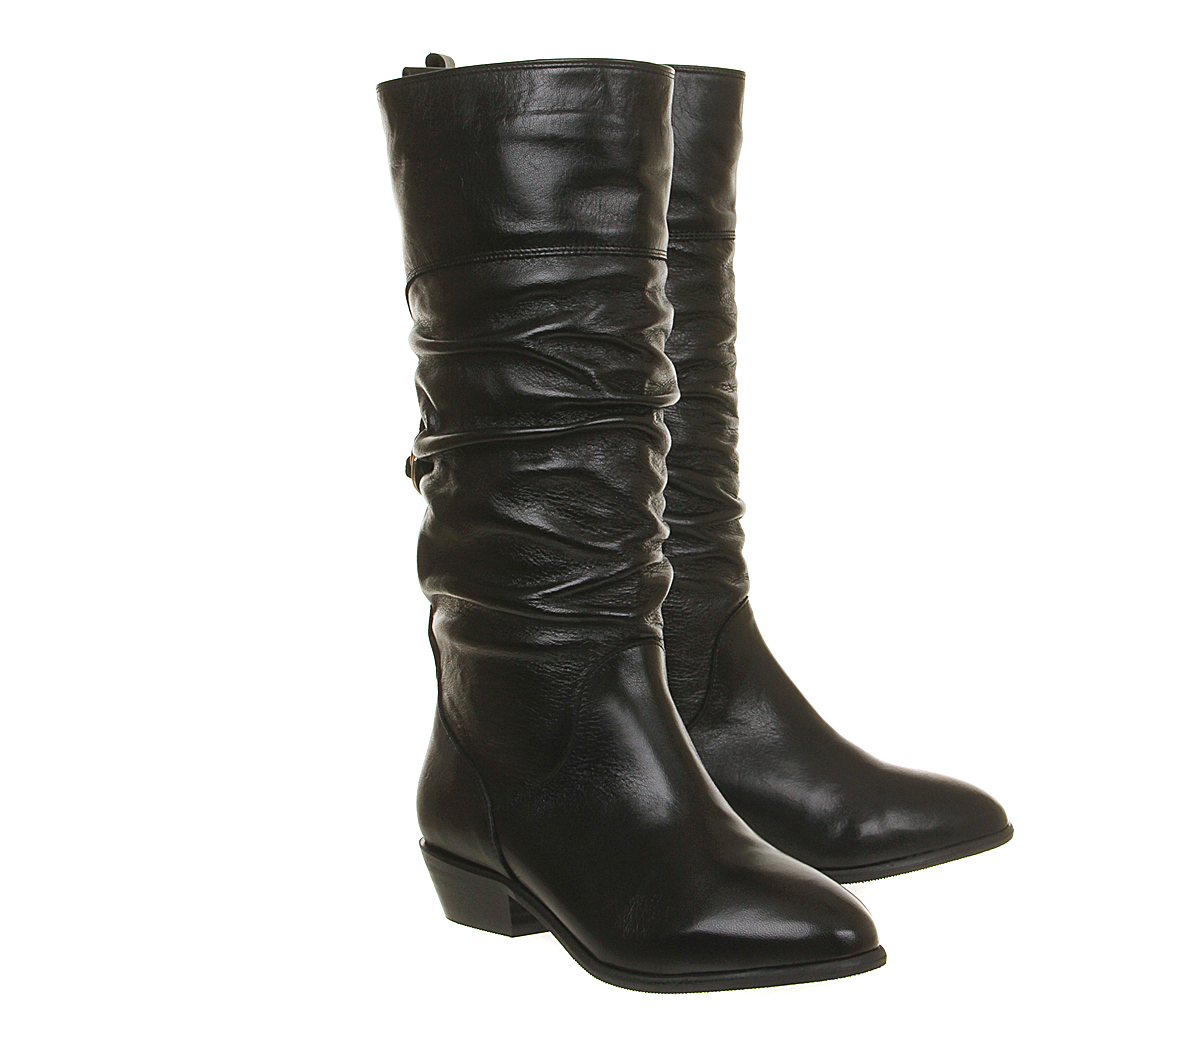 Office Nicola Ruched Boots Black Leather - Knee High Boots